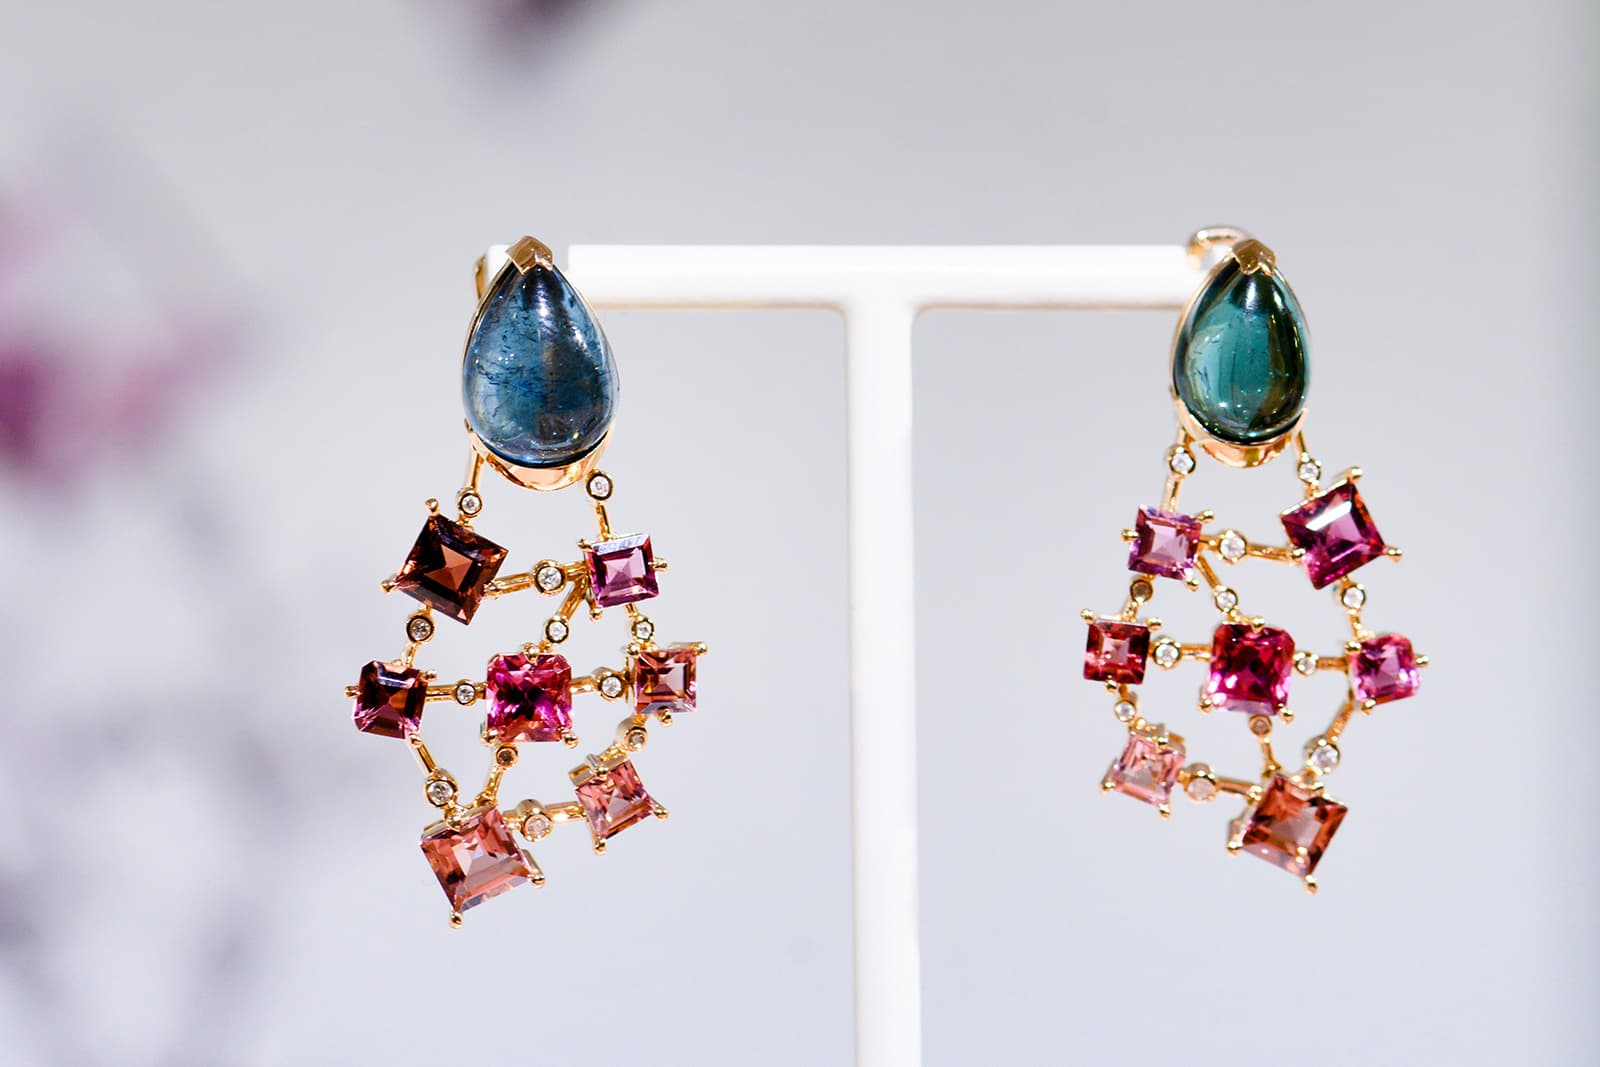 Nuun 'Tissu' earrings from the 'Manifesto' collection with 10.51ct green tourmalines, 10.32ct pink tourmalines and diamonds in yellow gold